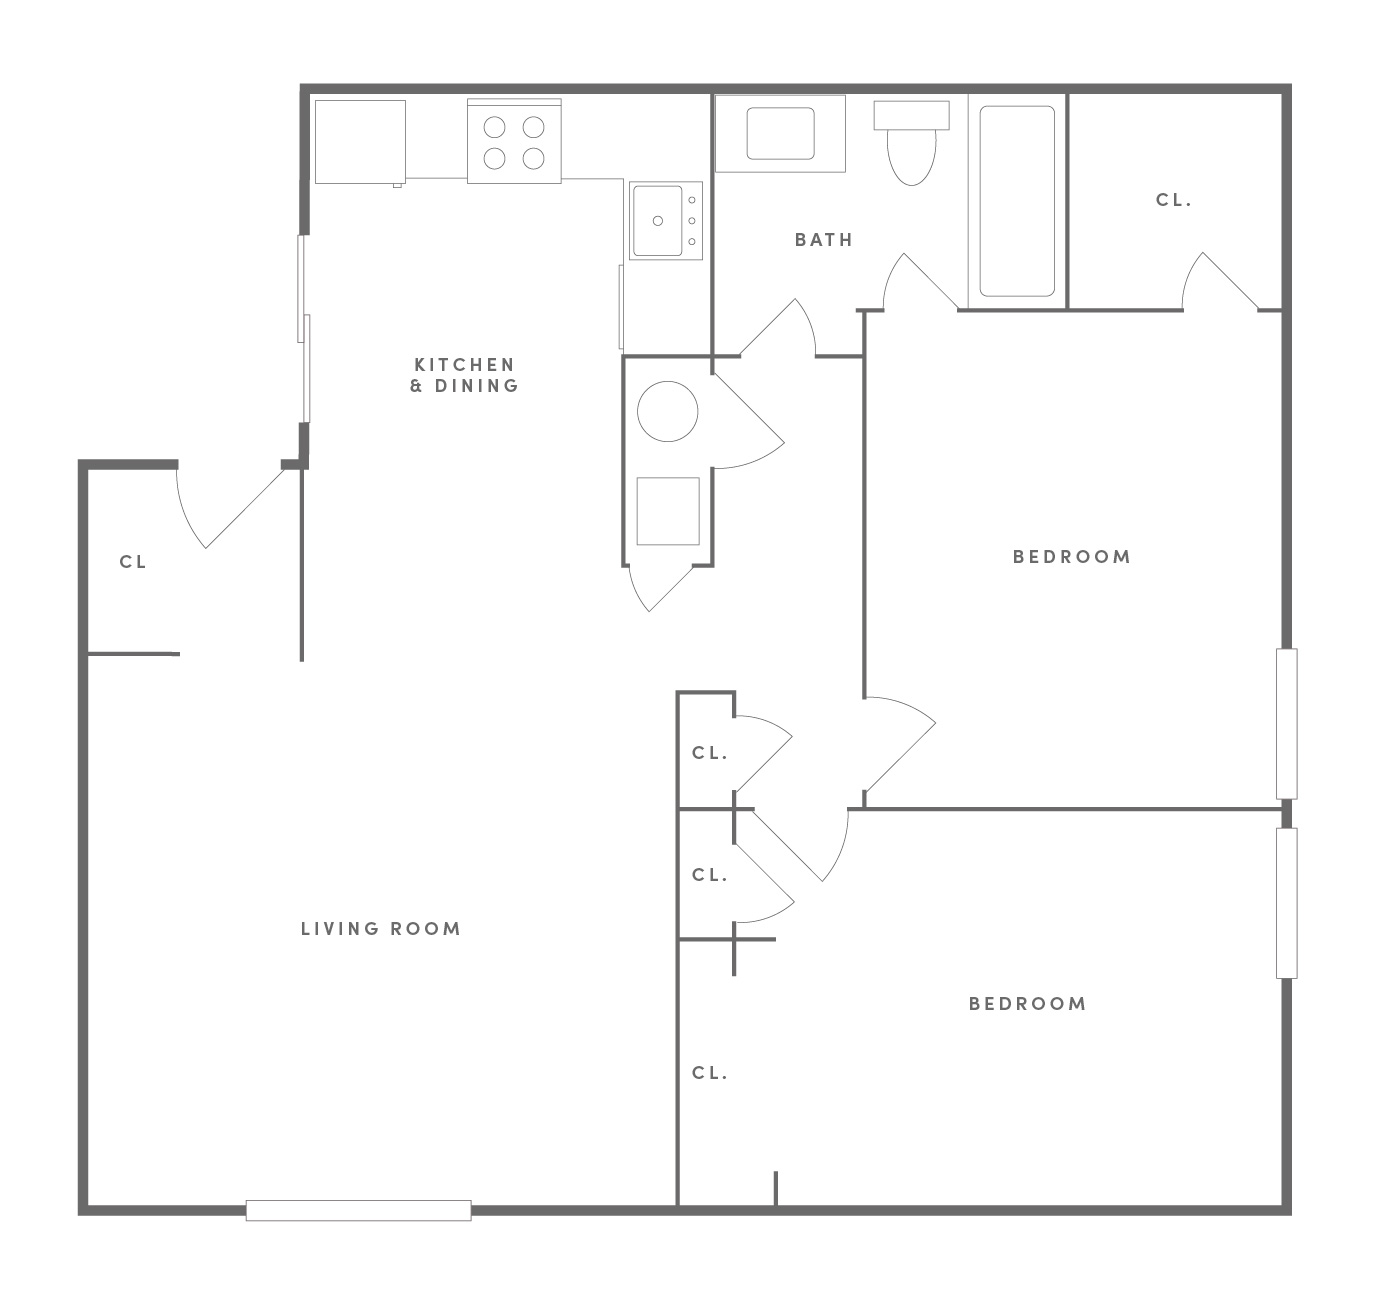 2 Bedroom Floor Plan  |  Neutral Paint Scheme, Hardwood-style Flooring, Gray Carpet, Refinished Cabinets, Spacious & Open Floor Plan, Walk-in Closet, Carpeted Bedrooms Window Coverings, Air Conditioning, Heating, Cable-ready, Washer / Dryer Available